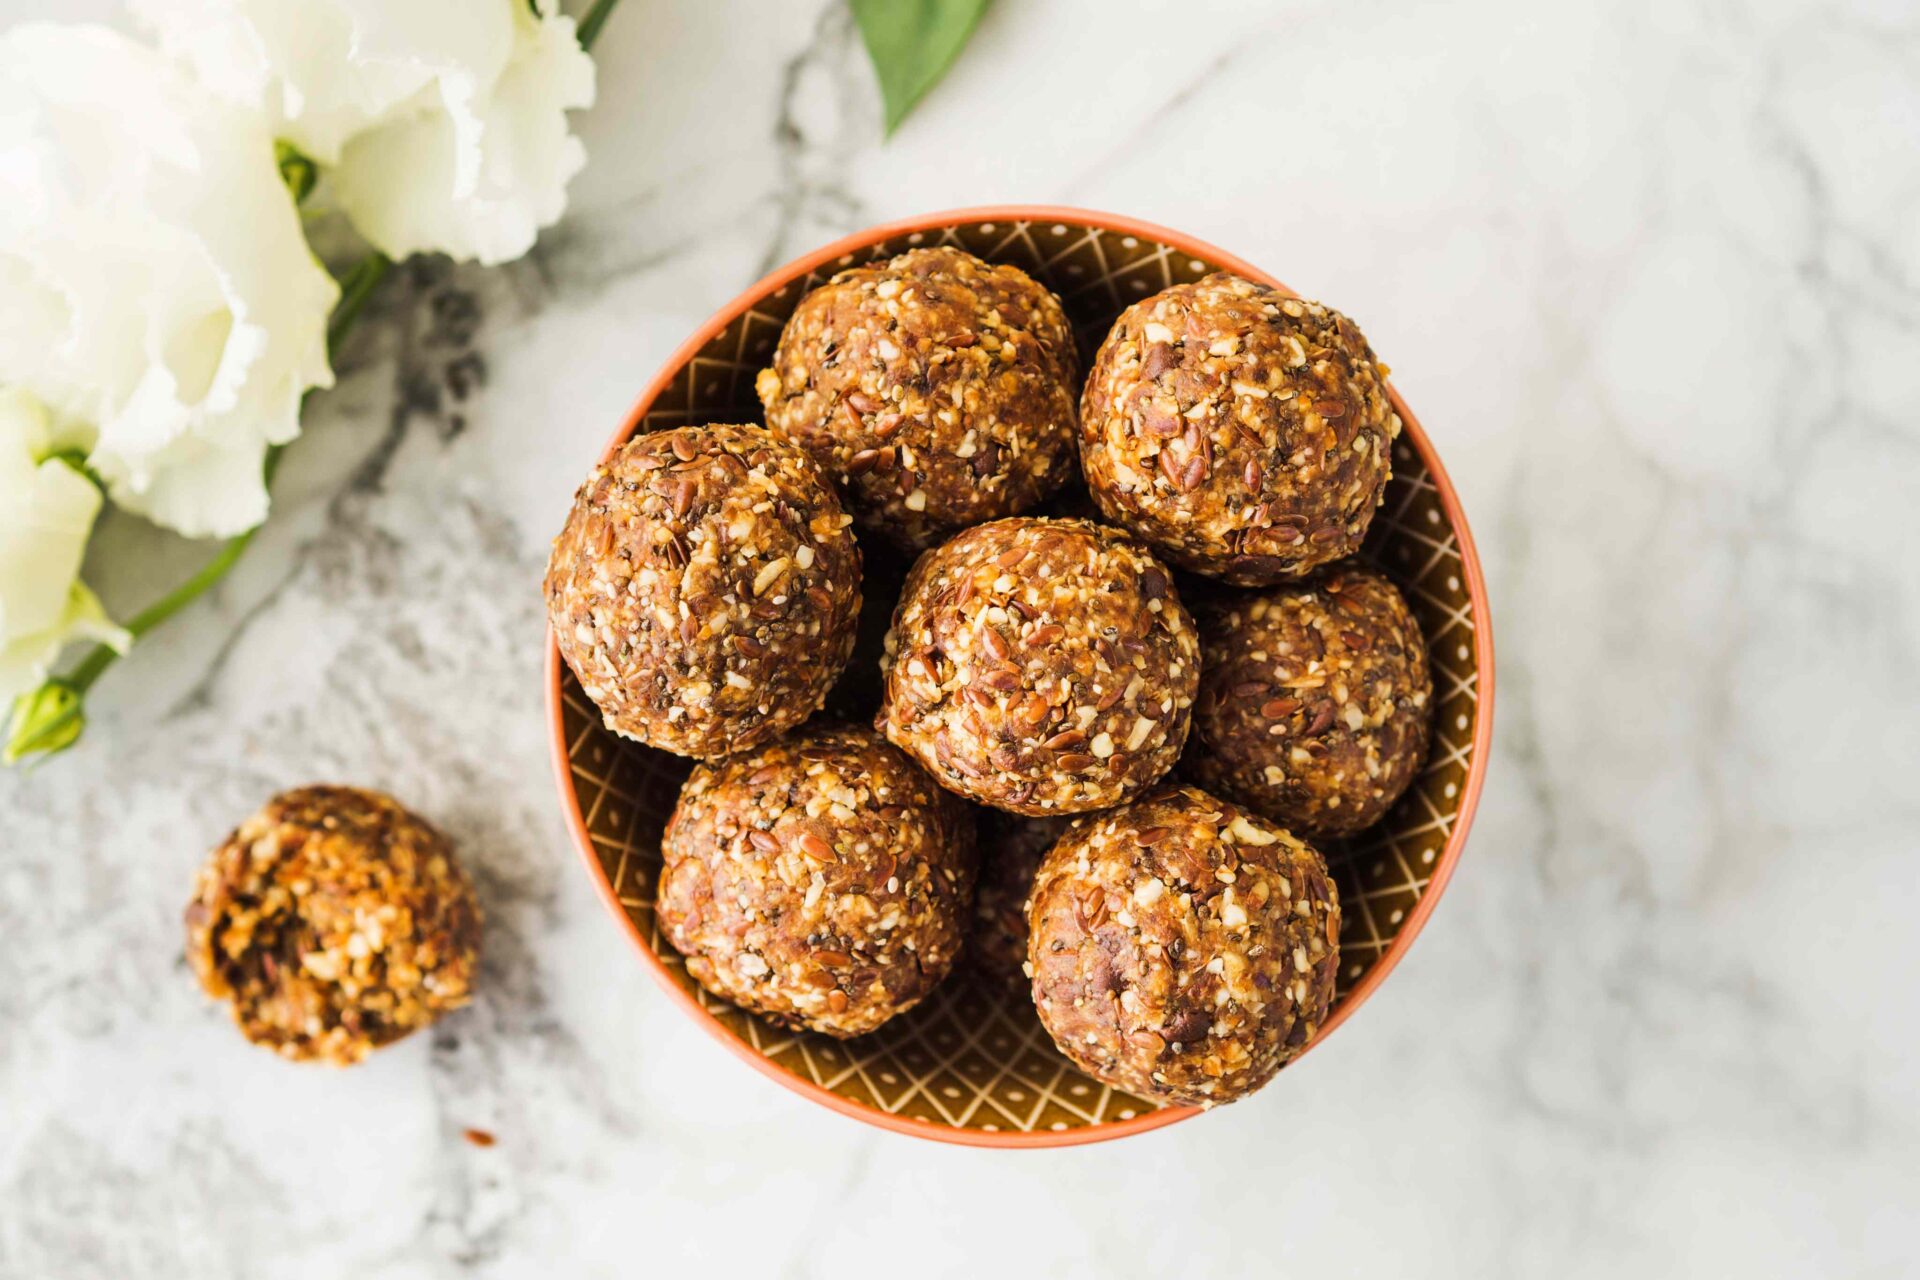 A Bowl of Protein Snack Bites Made with Organic Almonds